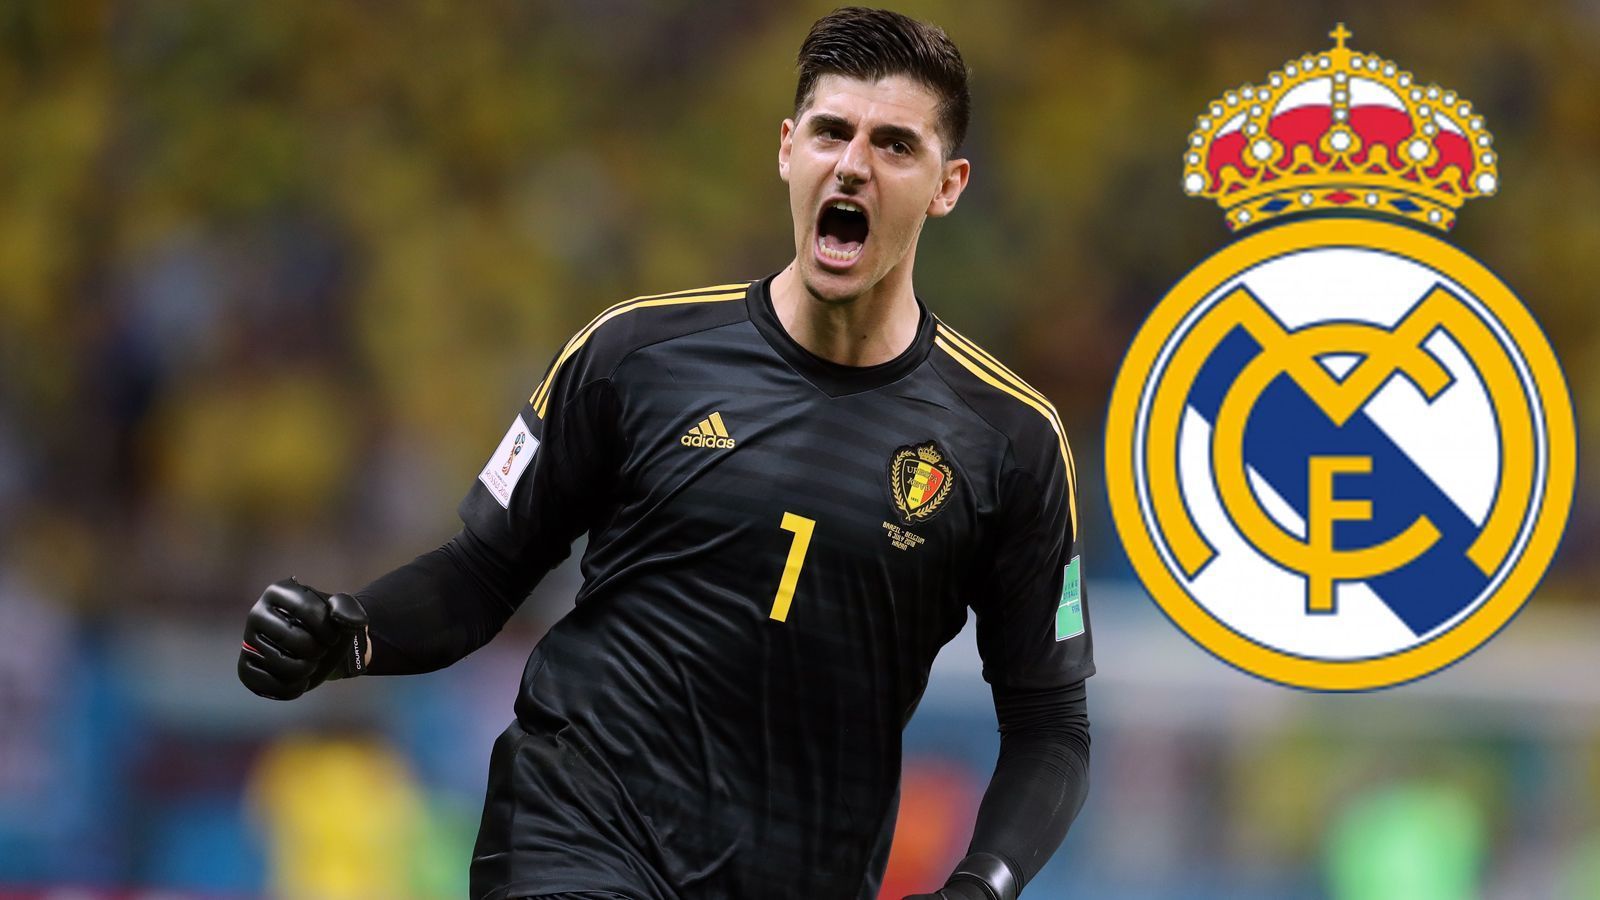 
                <strong>Platz 7 - Thibaut Courtois (Real Madrid)</strong><br>
                &#x2022; <strong>Wechsel von:</strong> FC Chelsea (2018)<br>&#x2022; <strong>Ablösesumme:</strong> 35 Millionen Euro<br>
              